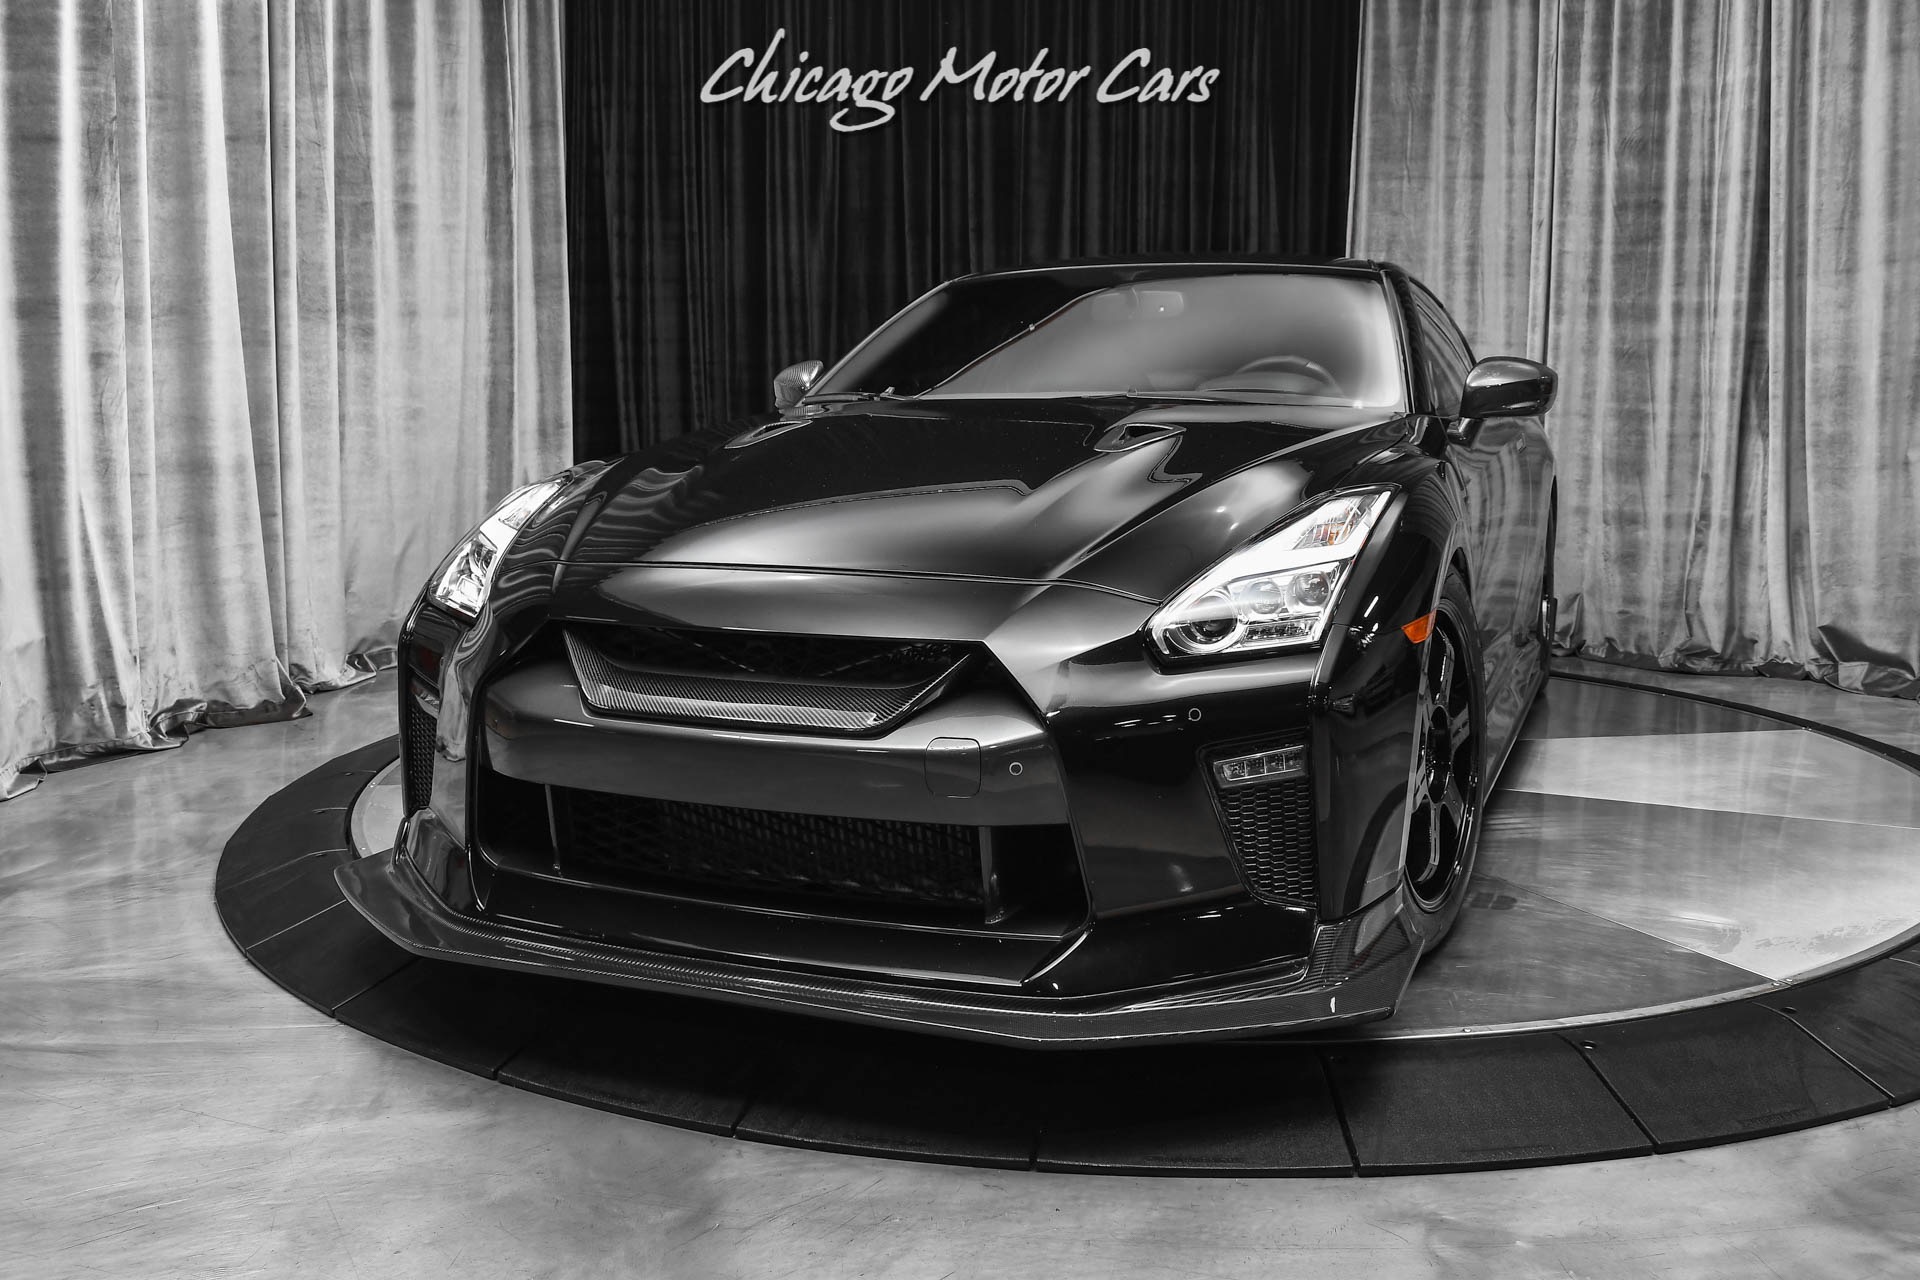 Used-2019-Nissan-GT-R-Premium-887WHP-Upgraded-Turbos